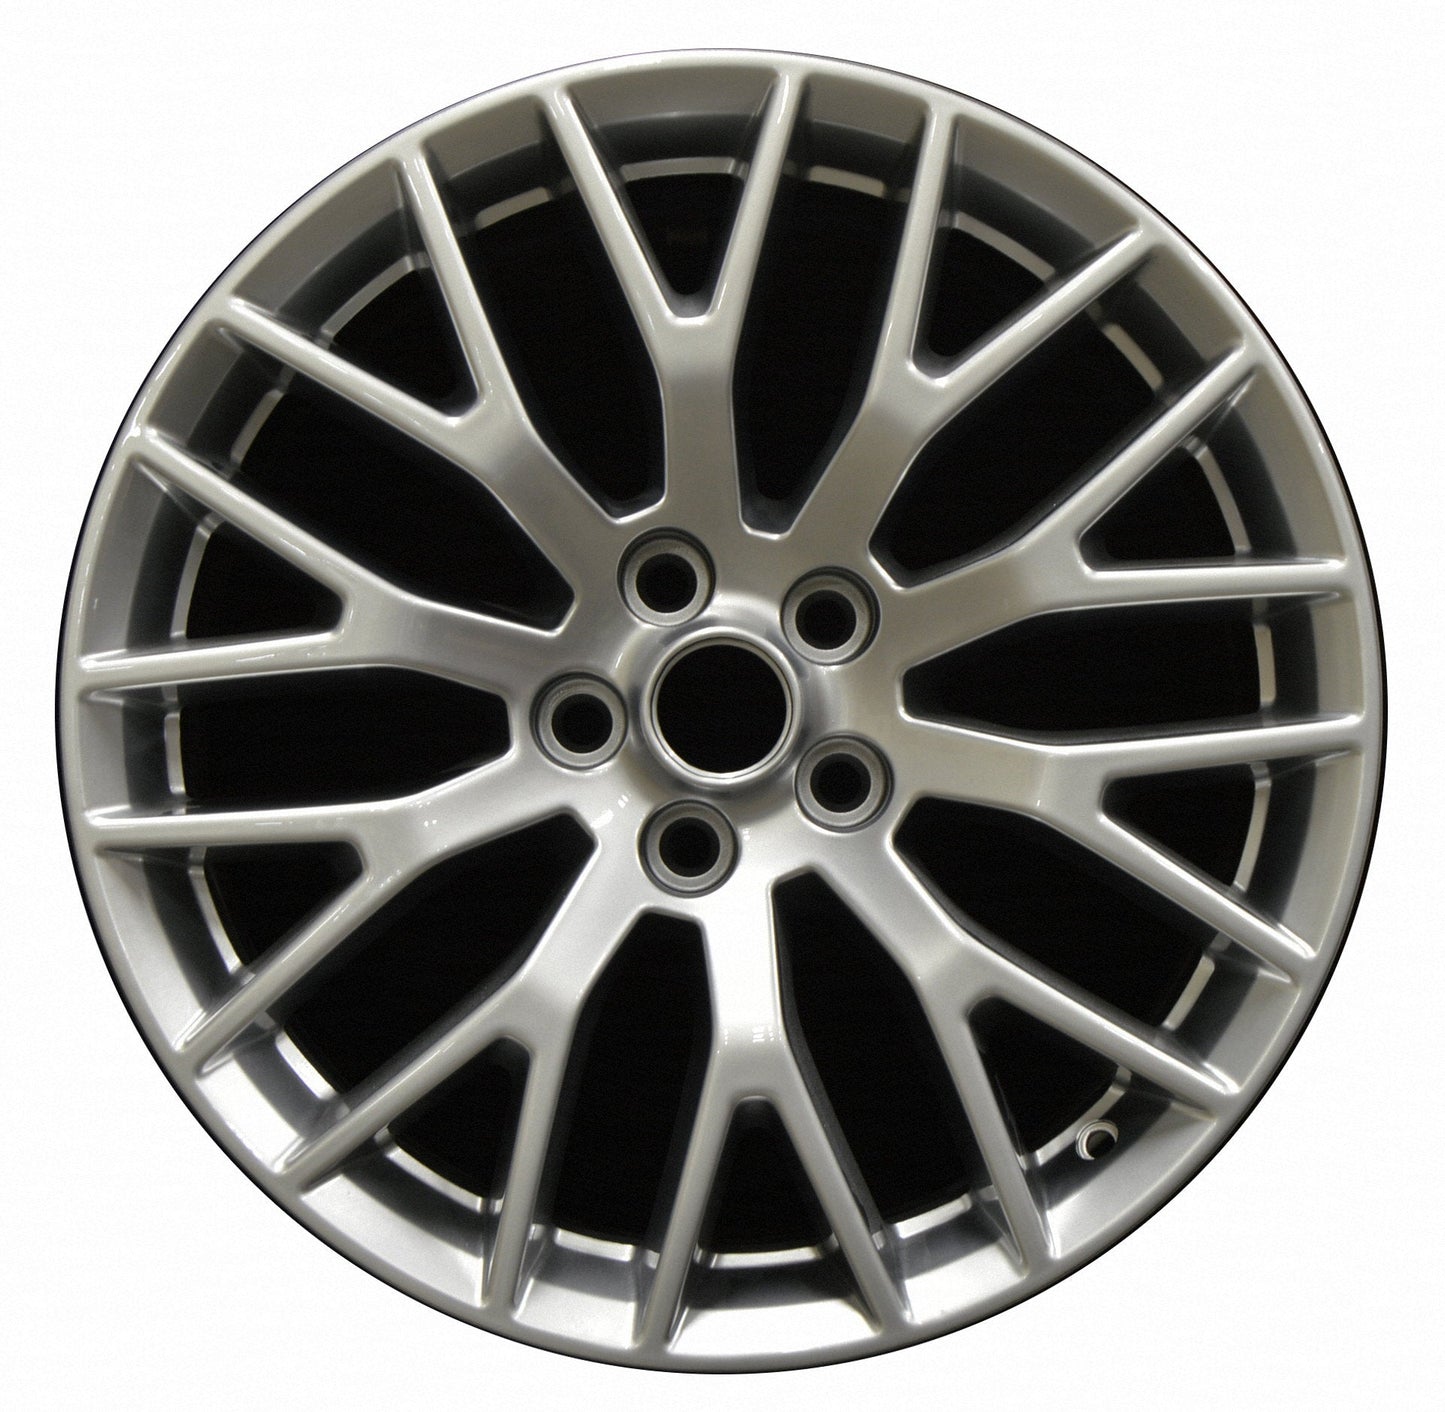 Ford Mustang  2015, 2016, 2017, 2018 Factory OEM Car Wheel Size 19x9.5 Alloy WAO.10038RE.LS100V2.FFBRT